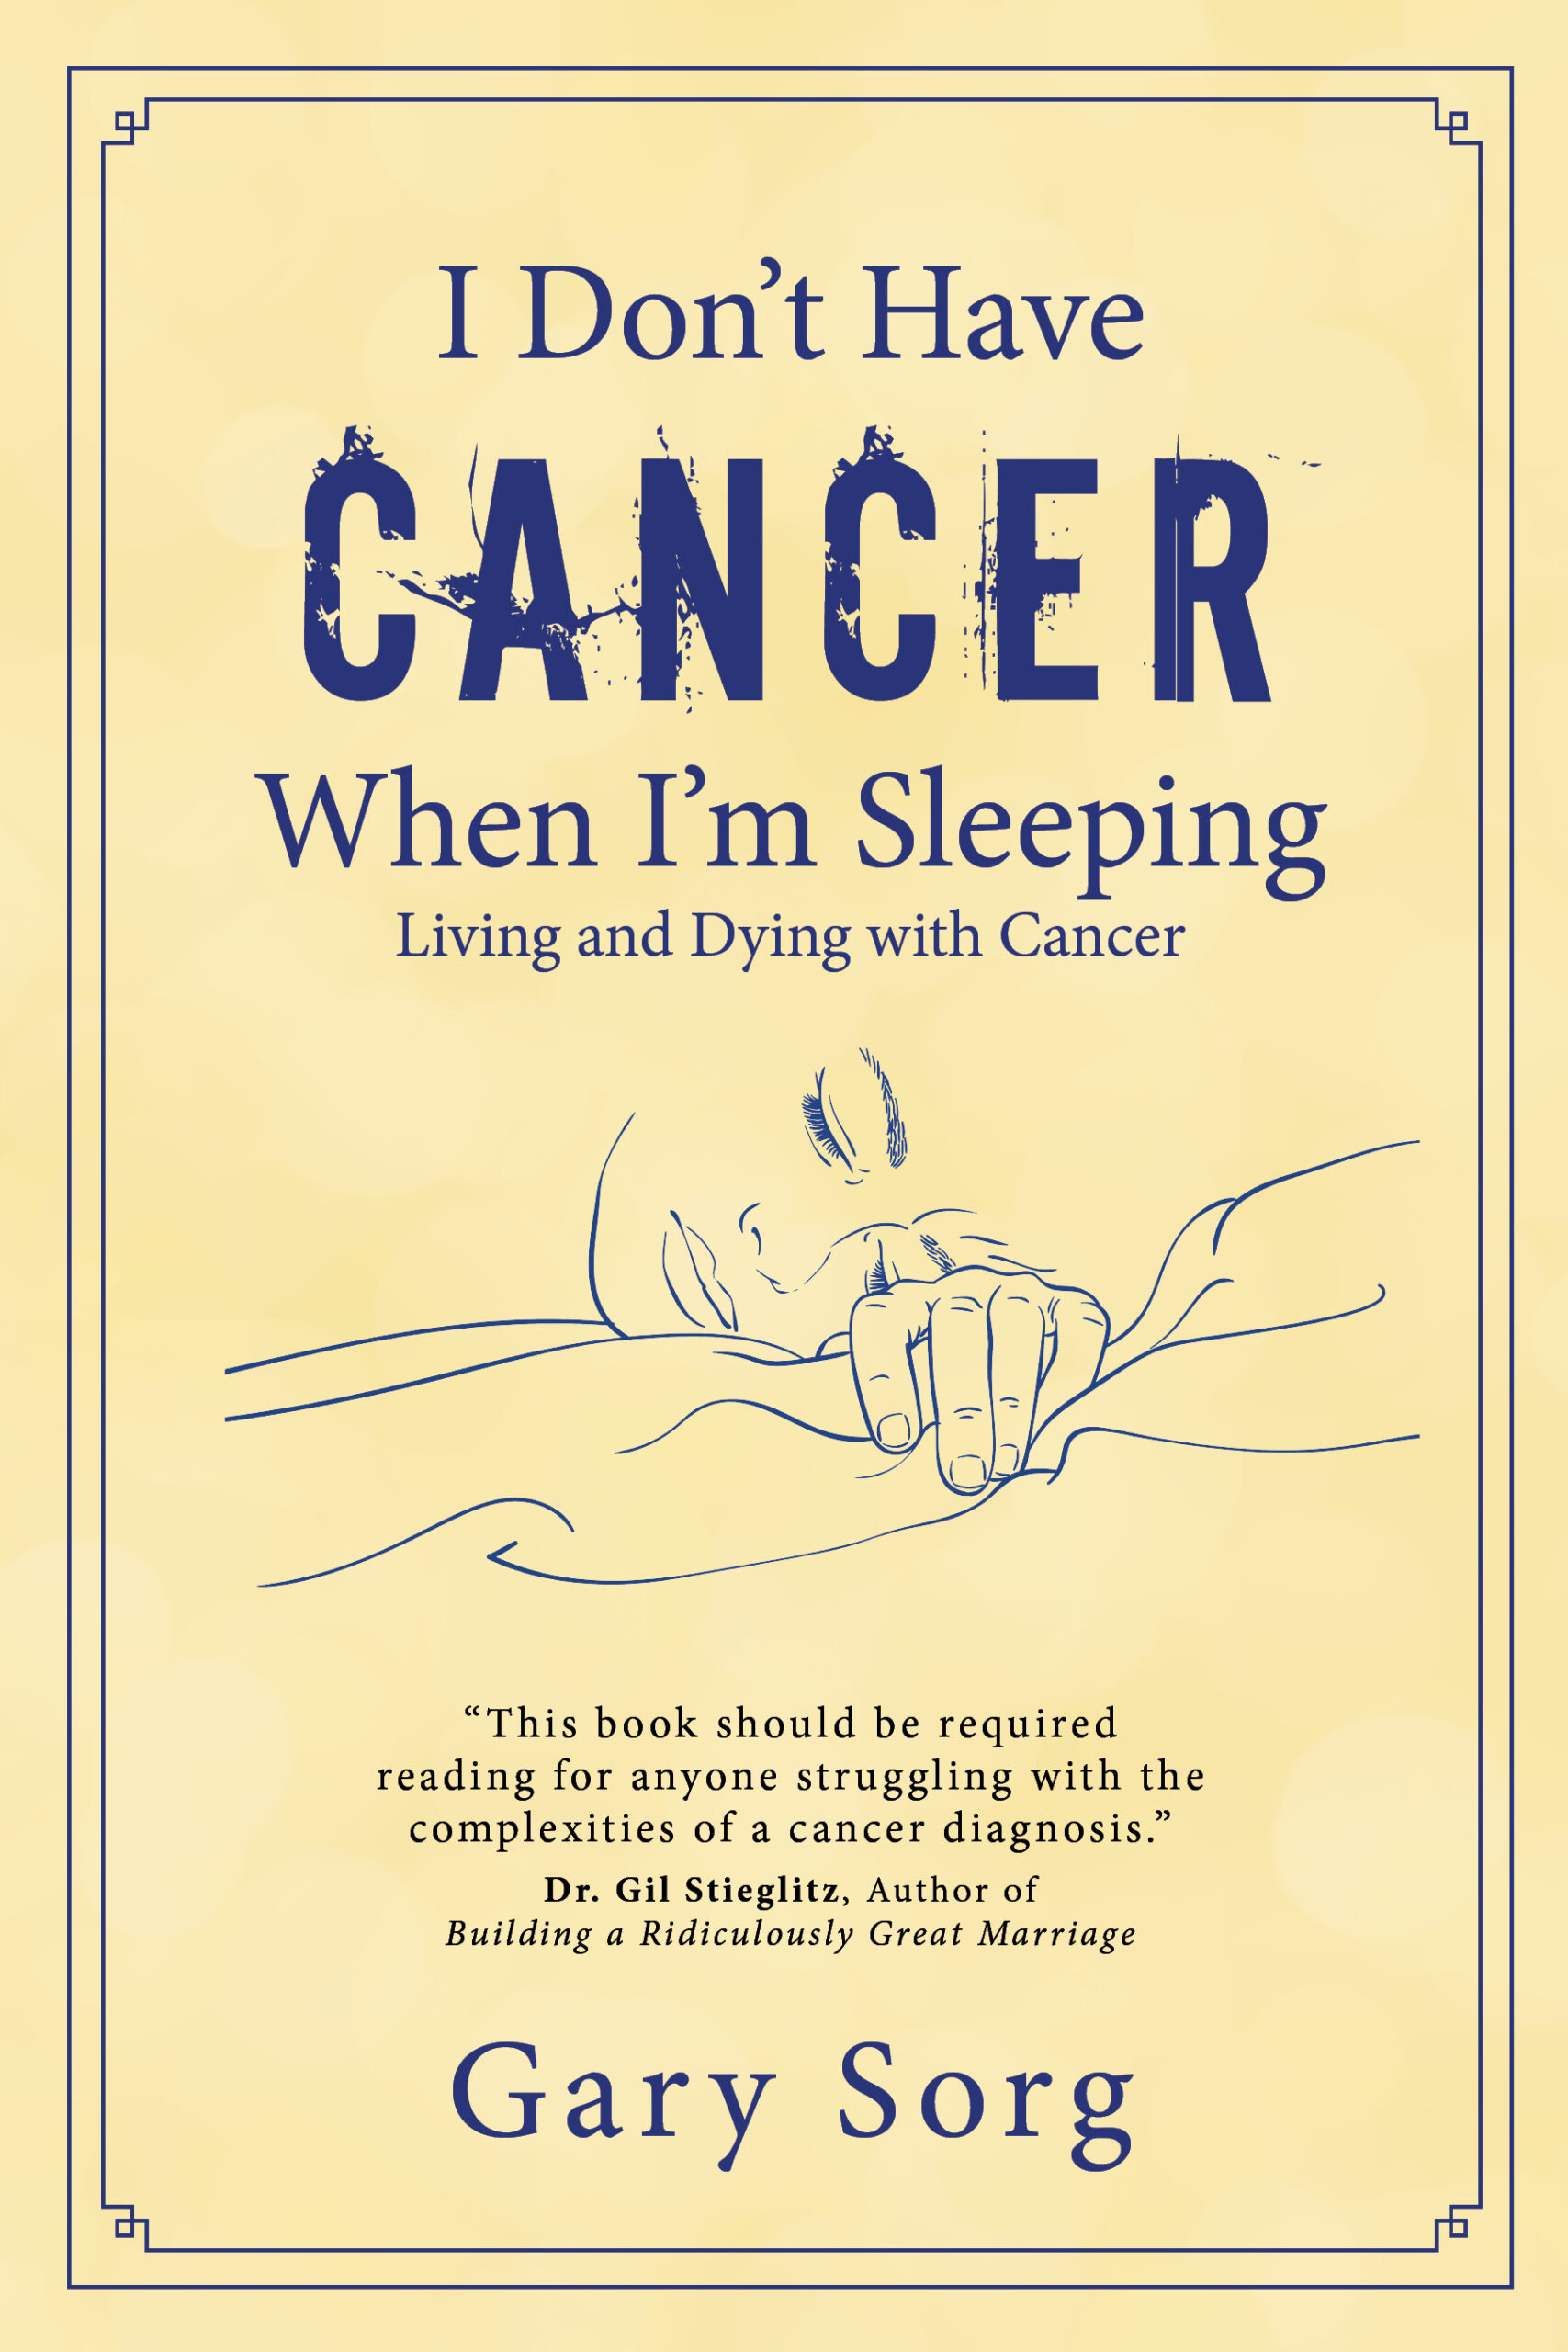 I Don't Have Cancer When I'm Sleeping